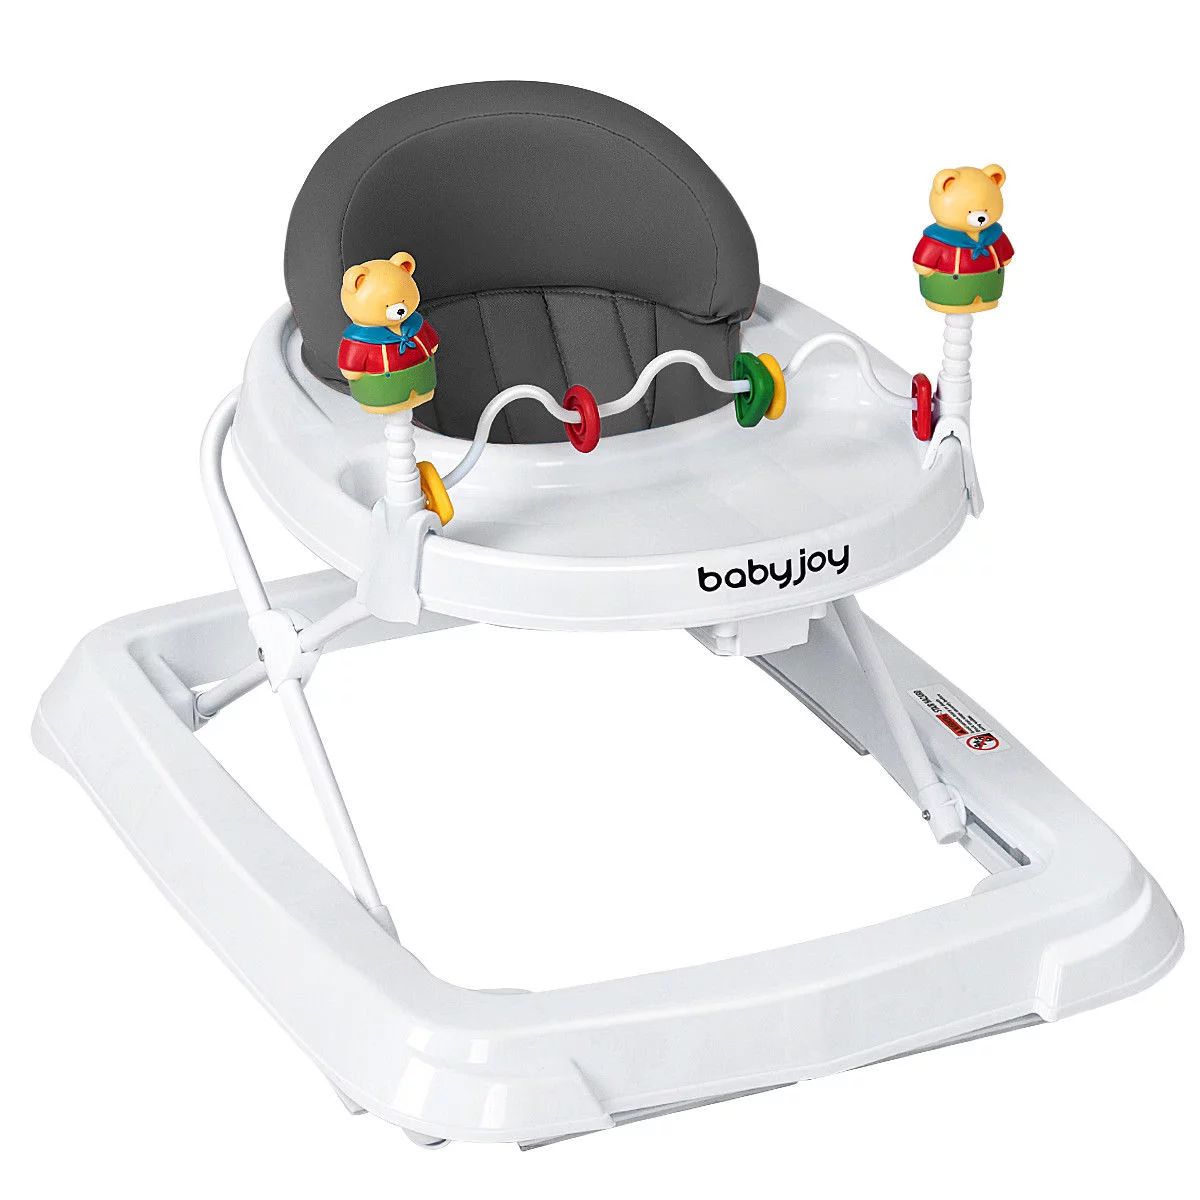 Baby Walker Adjustable Height Removable Toy Wheels Folding Portable 3 Colors | Walmart (US)